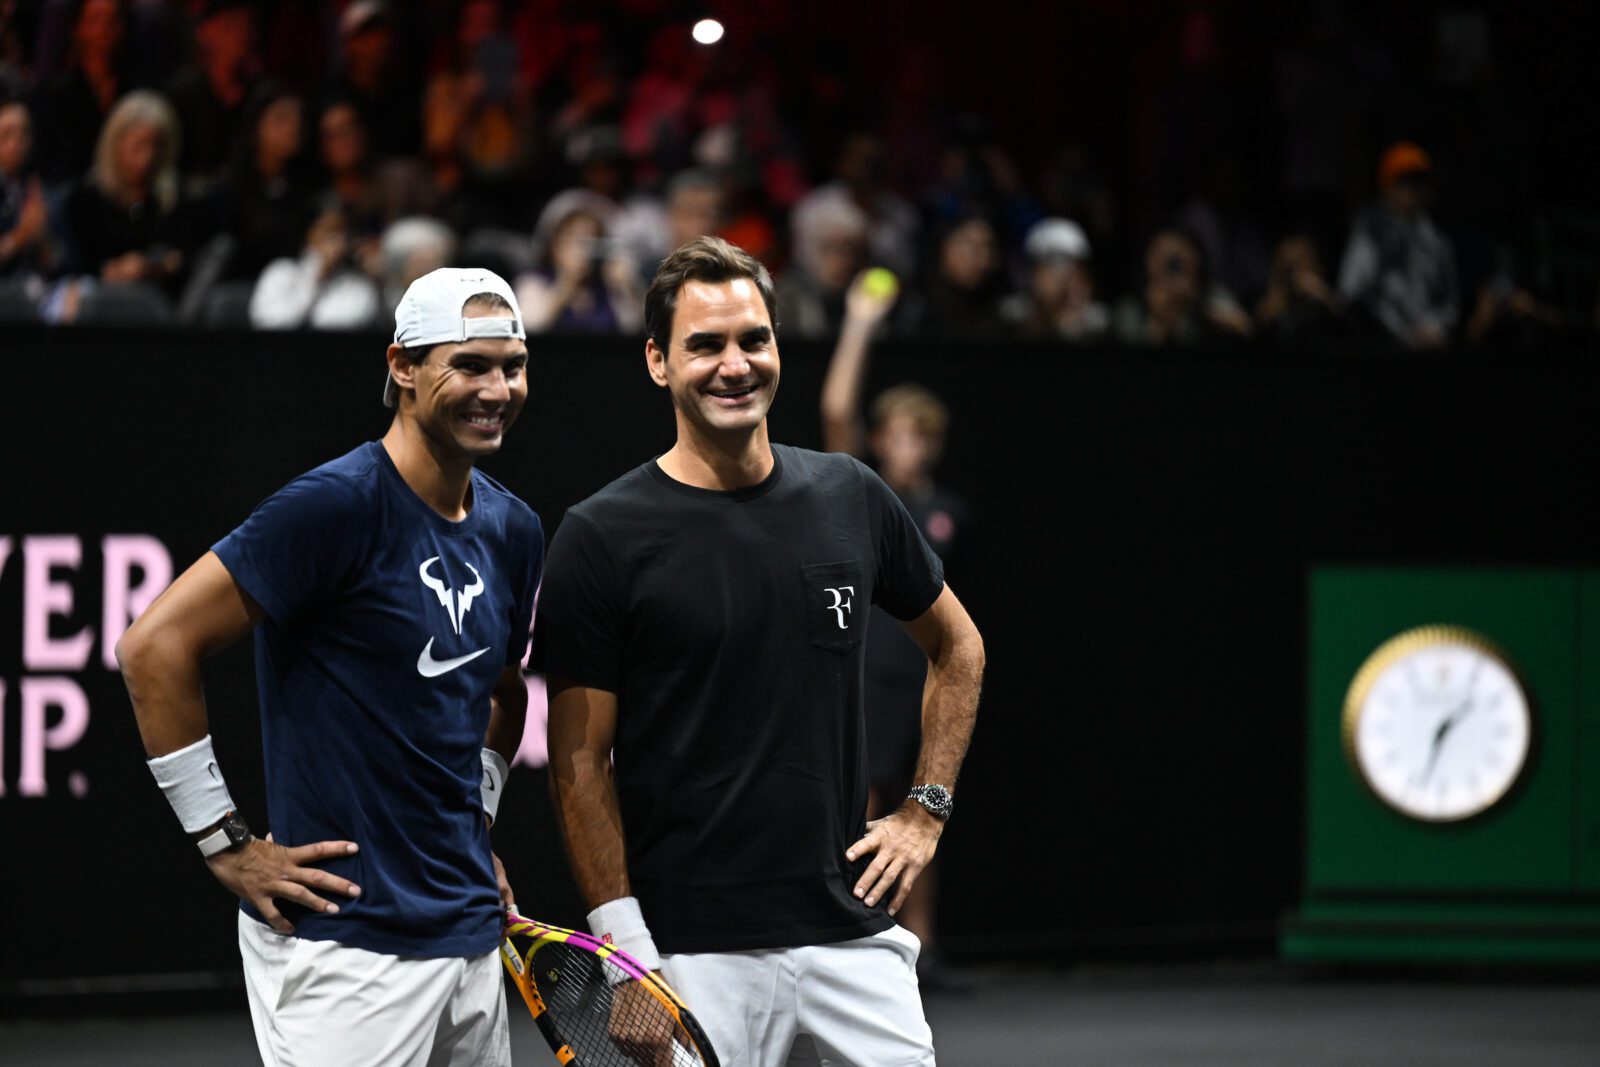 Laver Cup Roger Federer to team up with Rafael Nadal - On Court